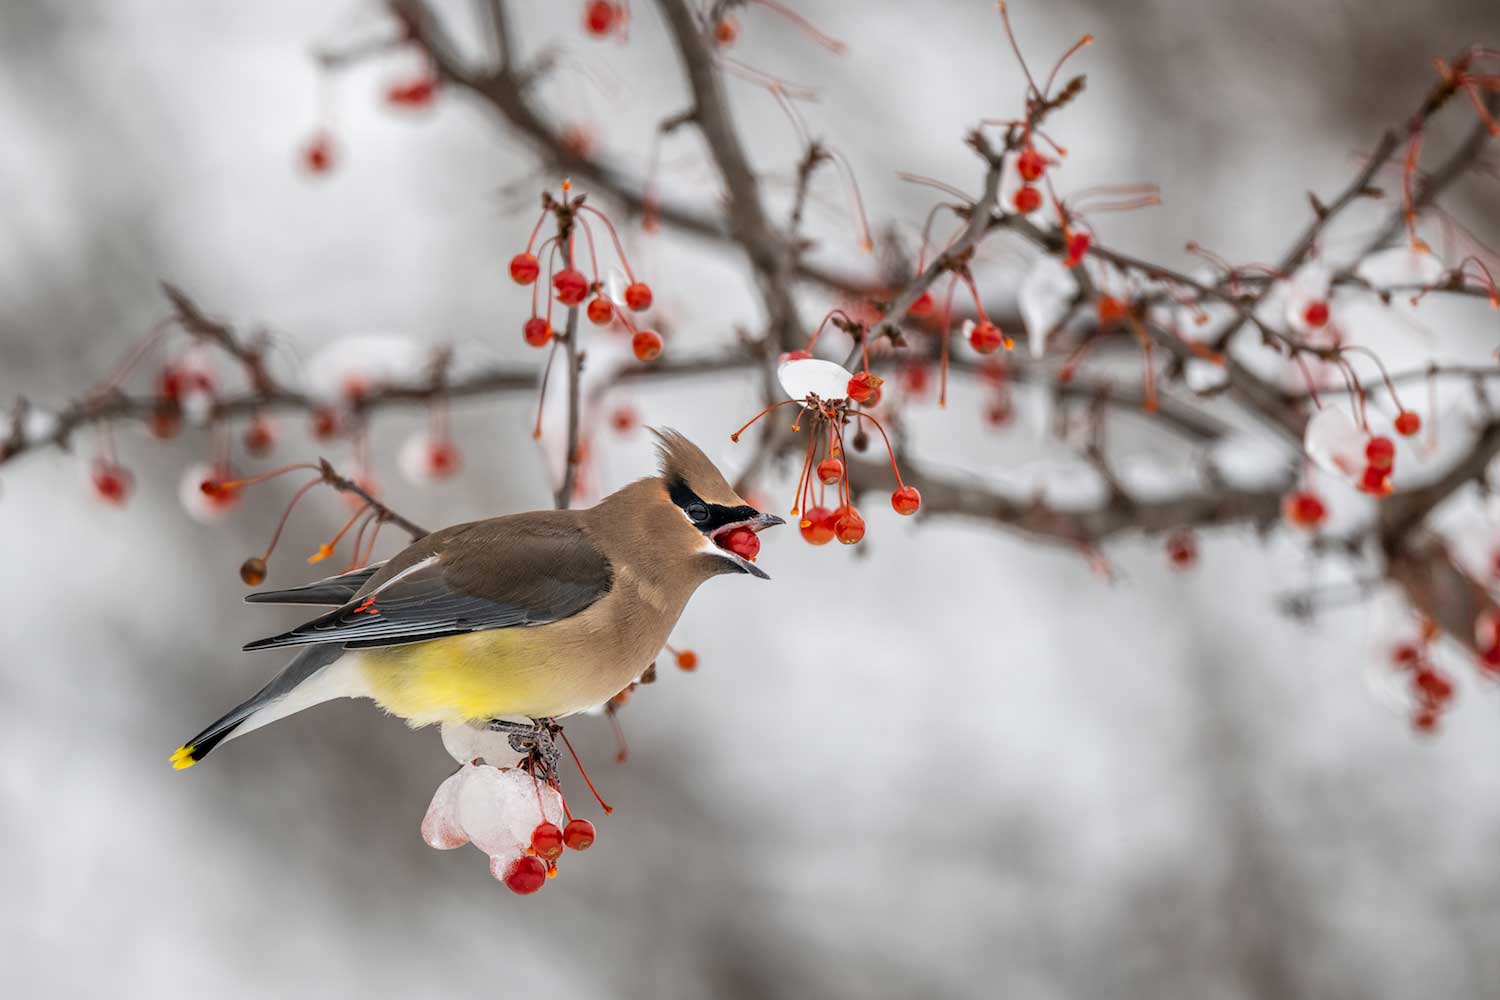 A cedar waxwing eating fruit from a snow-covered tree.